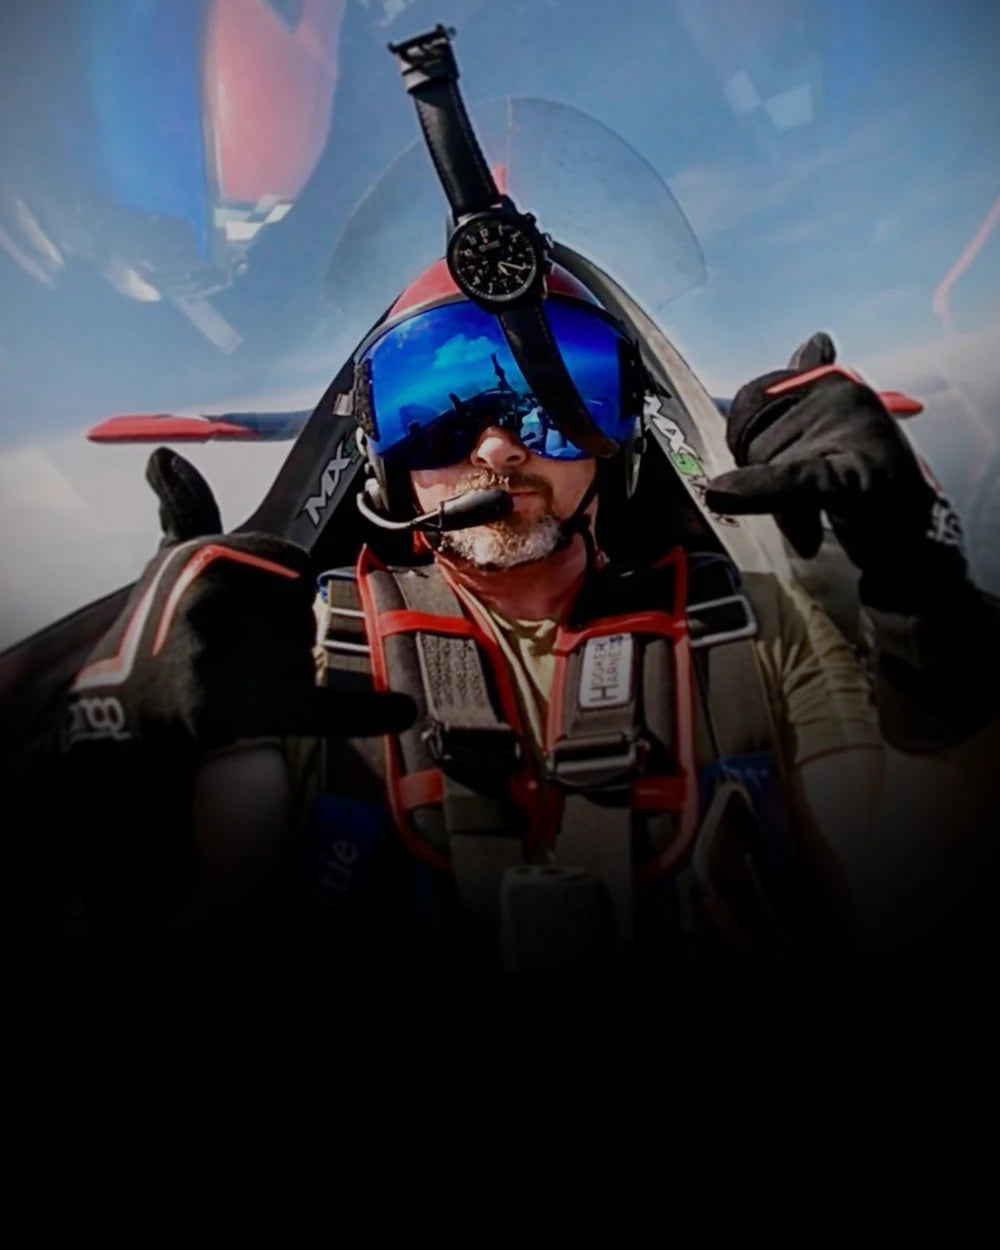 Bremont ambassador Rob Holland is one of the most decorated, respected, and innovative aerobatic pilots and air show performers in the world today.